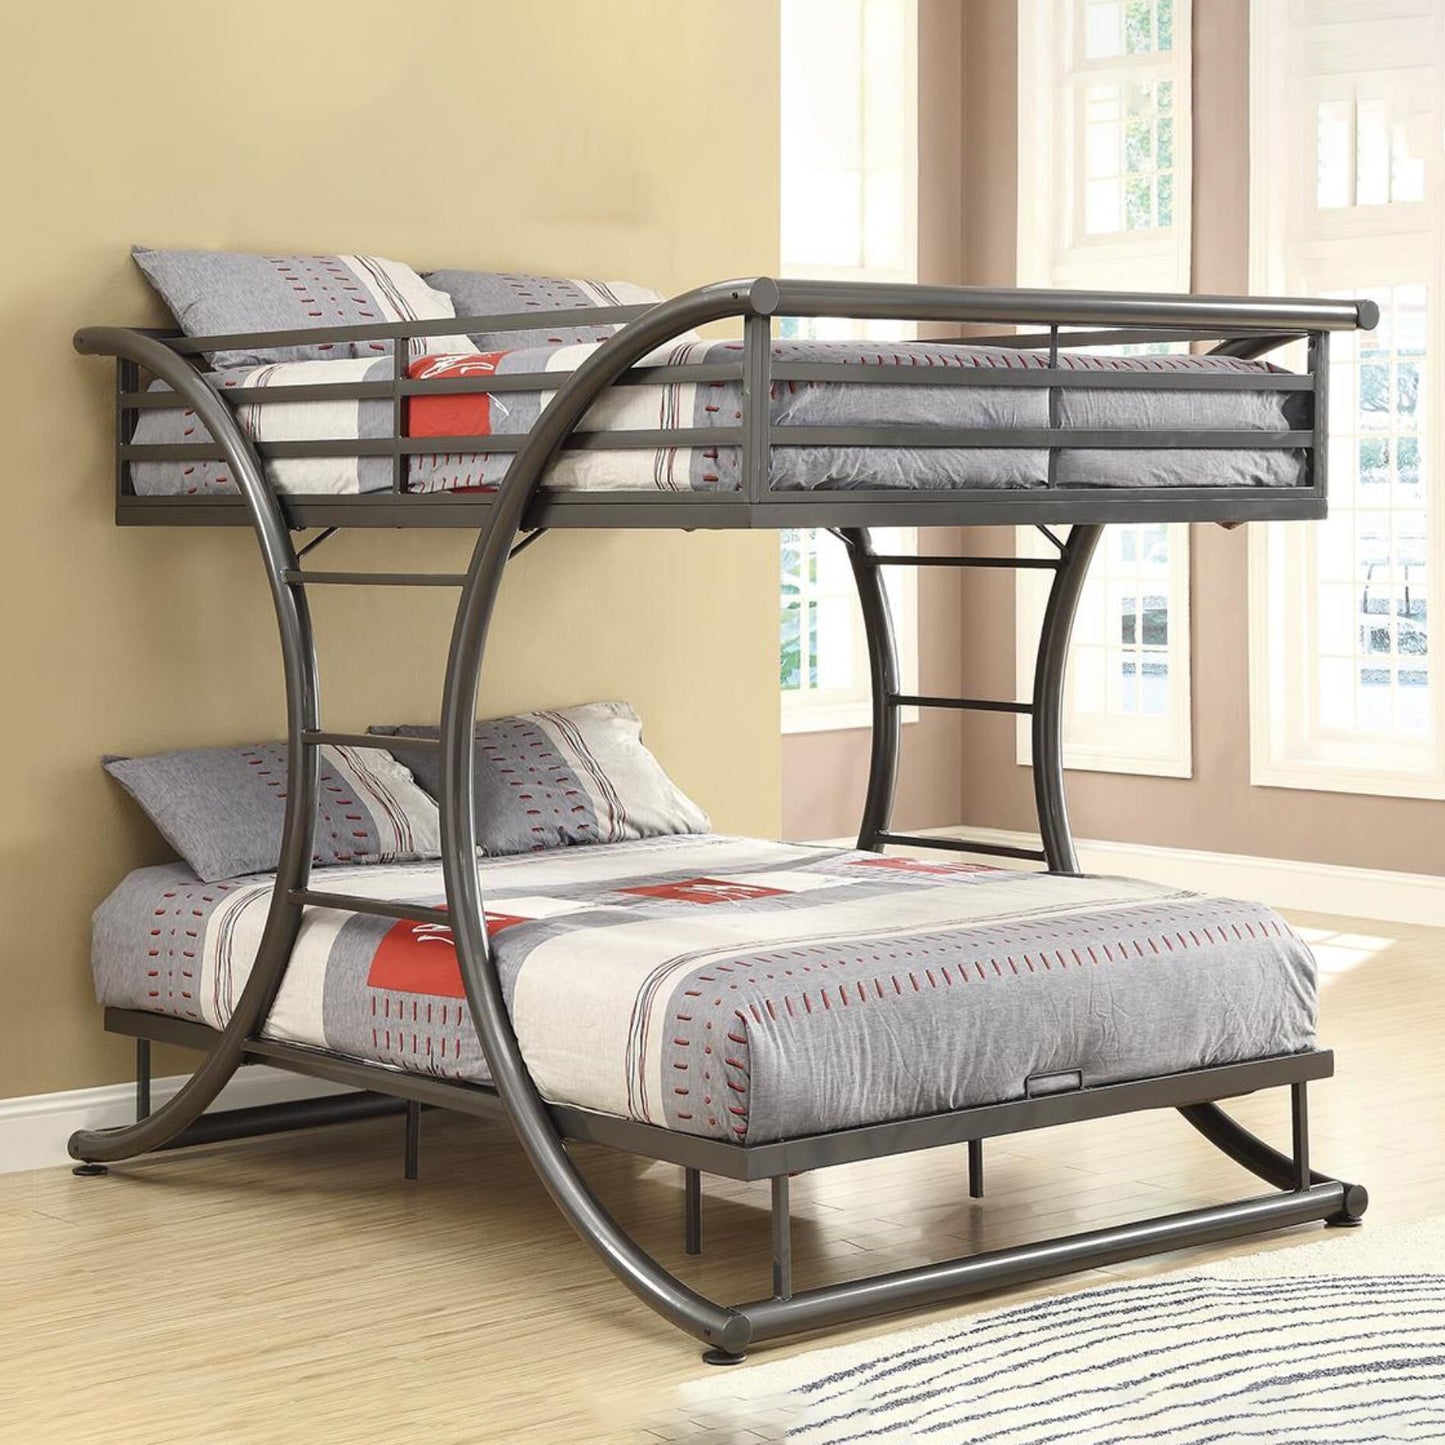 Metal Double Bed - Multi Colors - OSA16